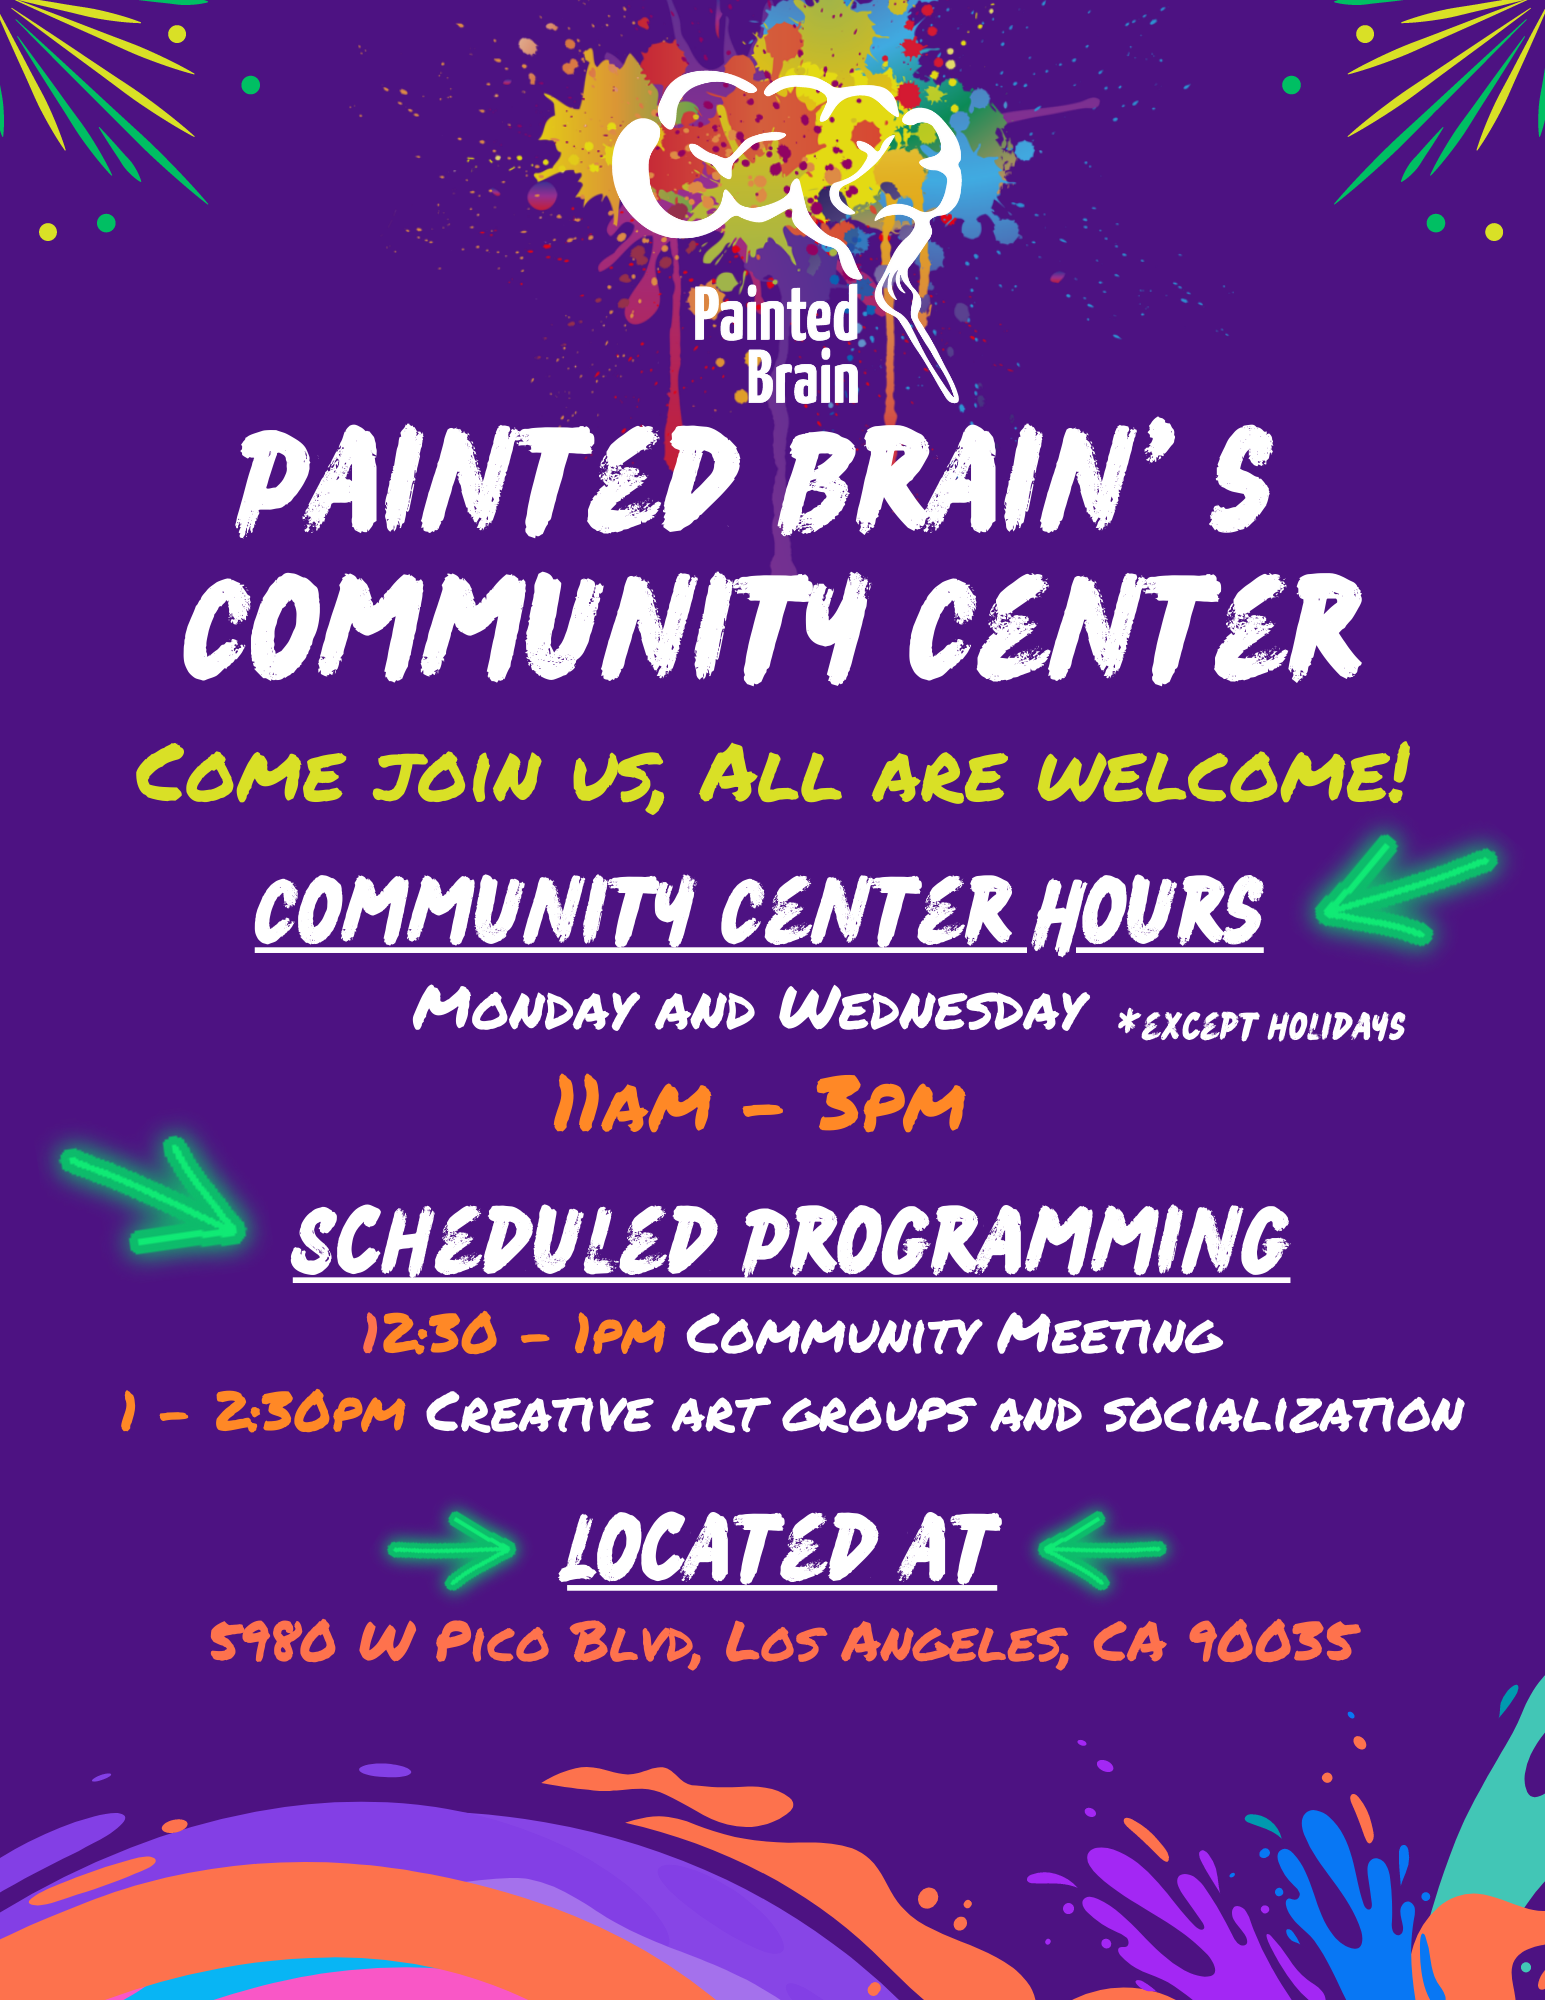 Painted-Brain-Community-Center-hours-and-location